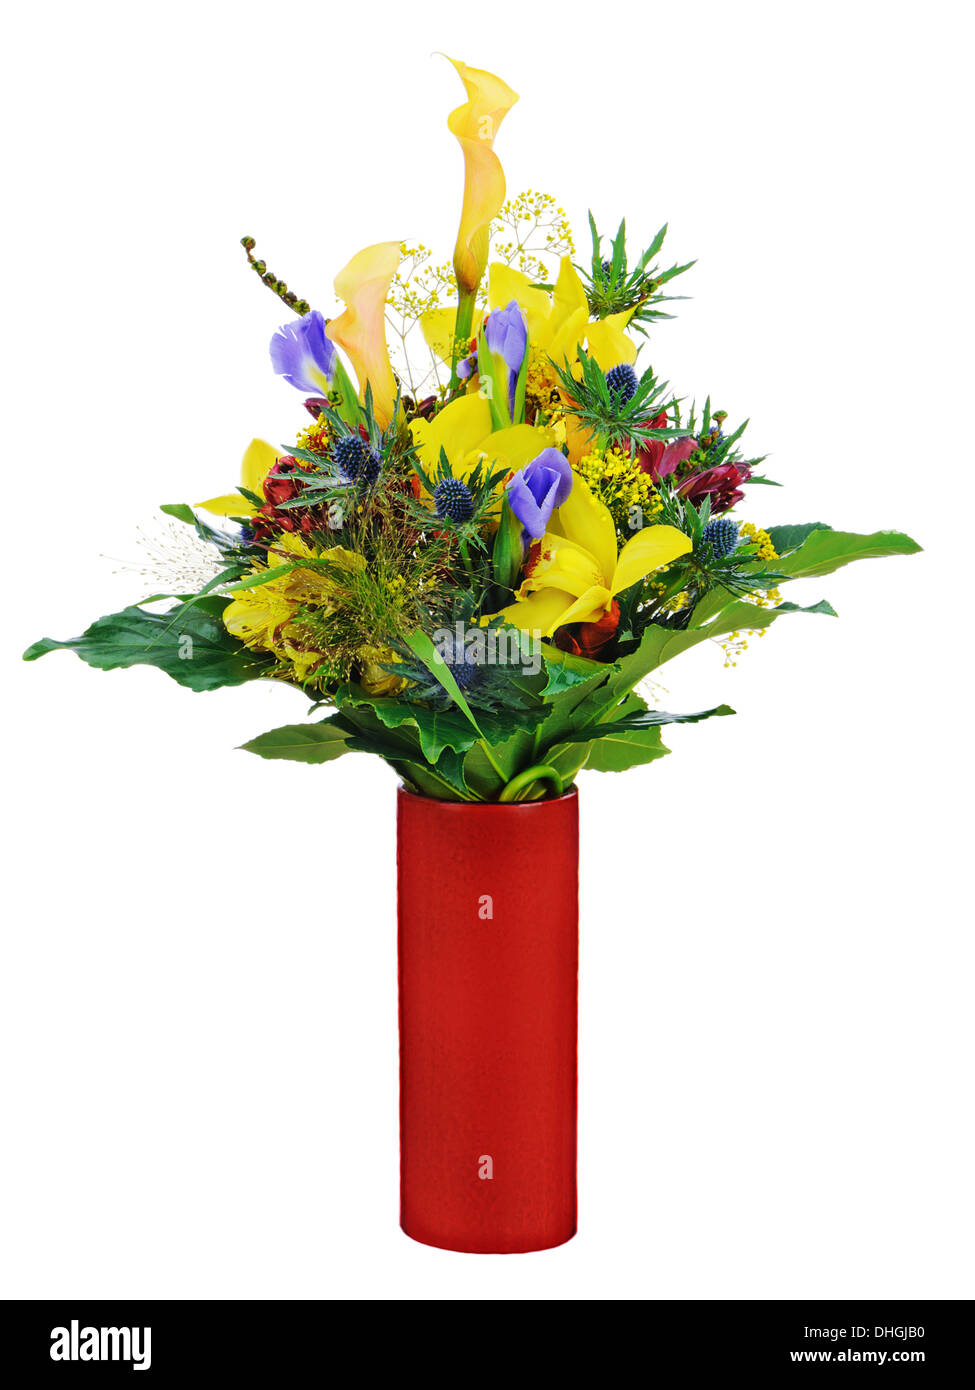 Colorful flower bouquet arrangement centerpiece in vase isolated on white background. Closeup. Stock Photo